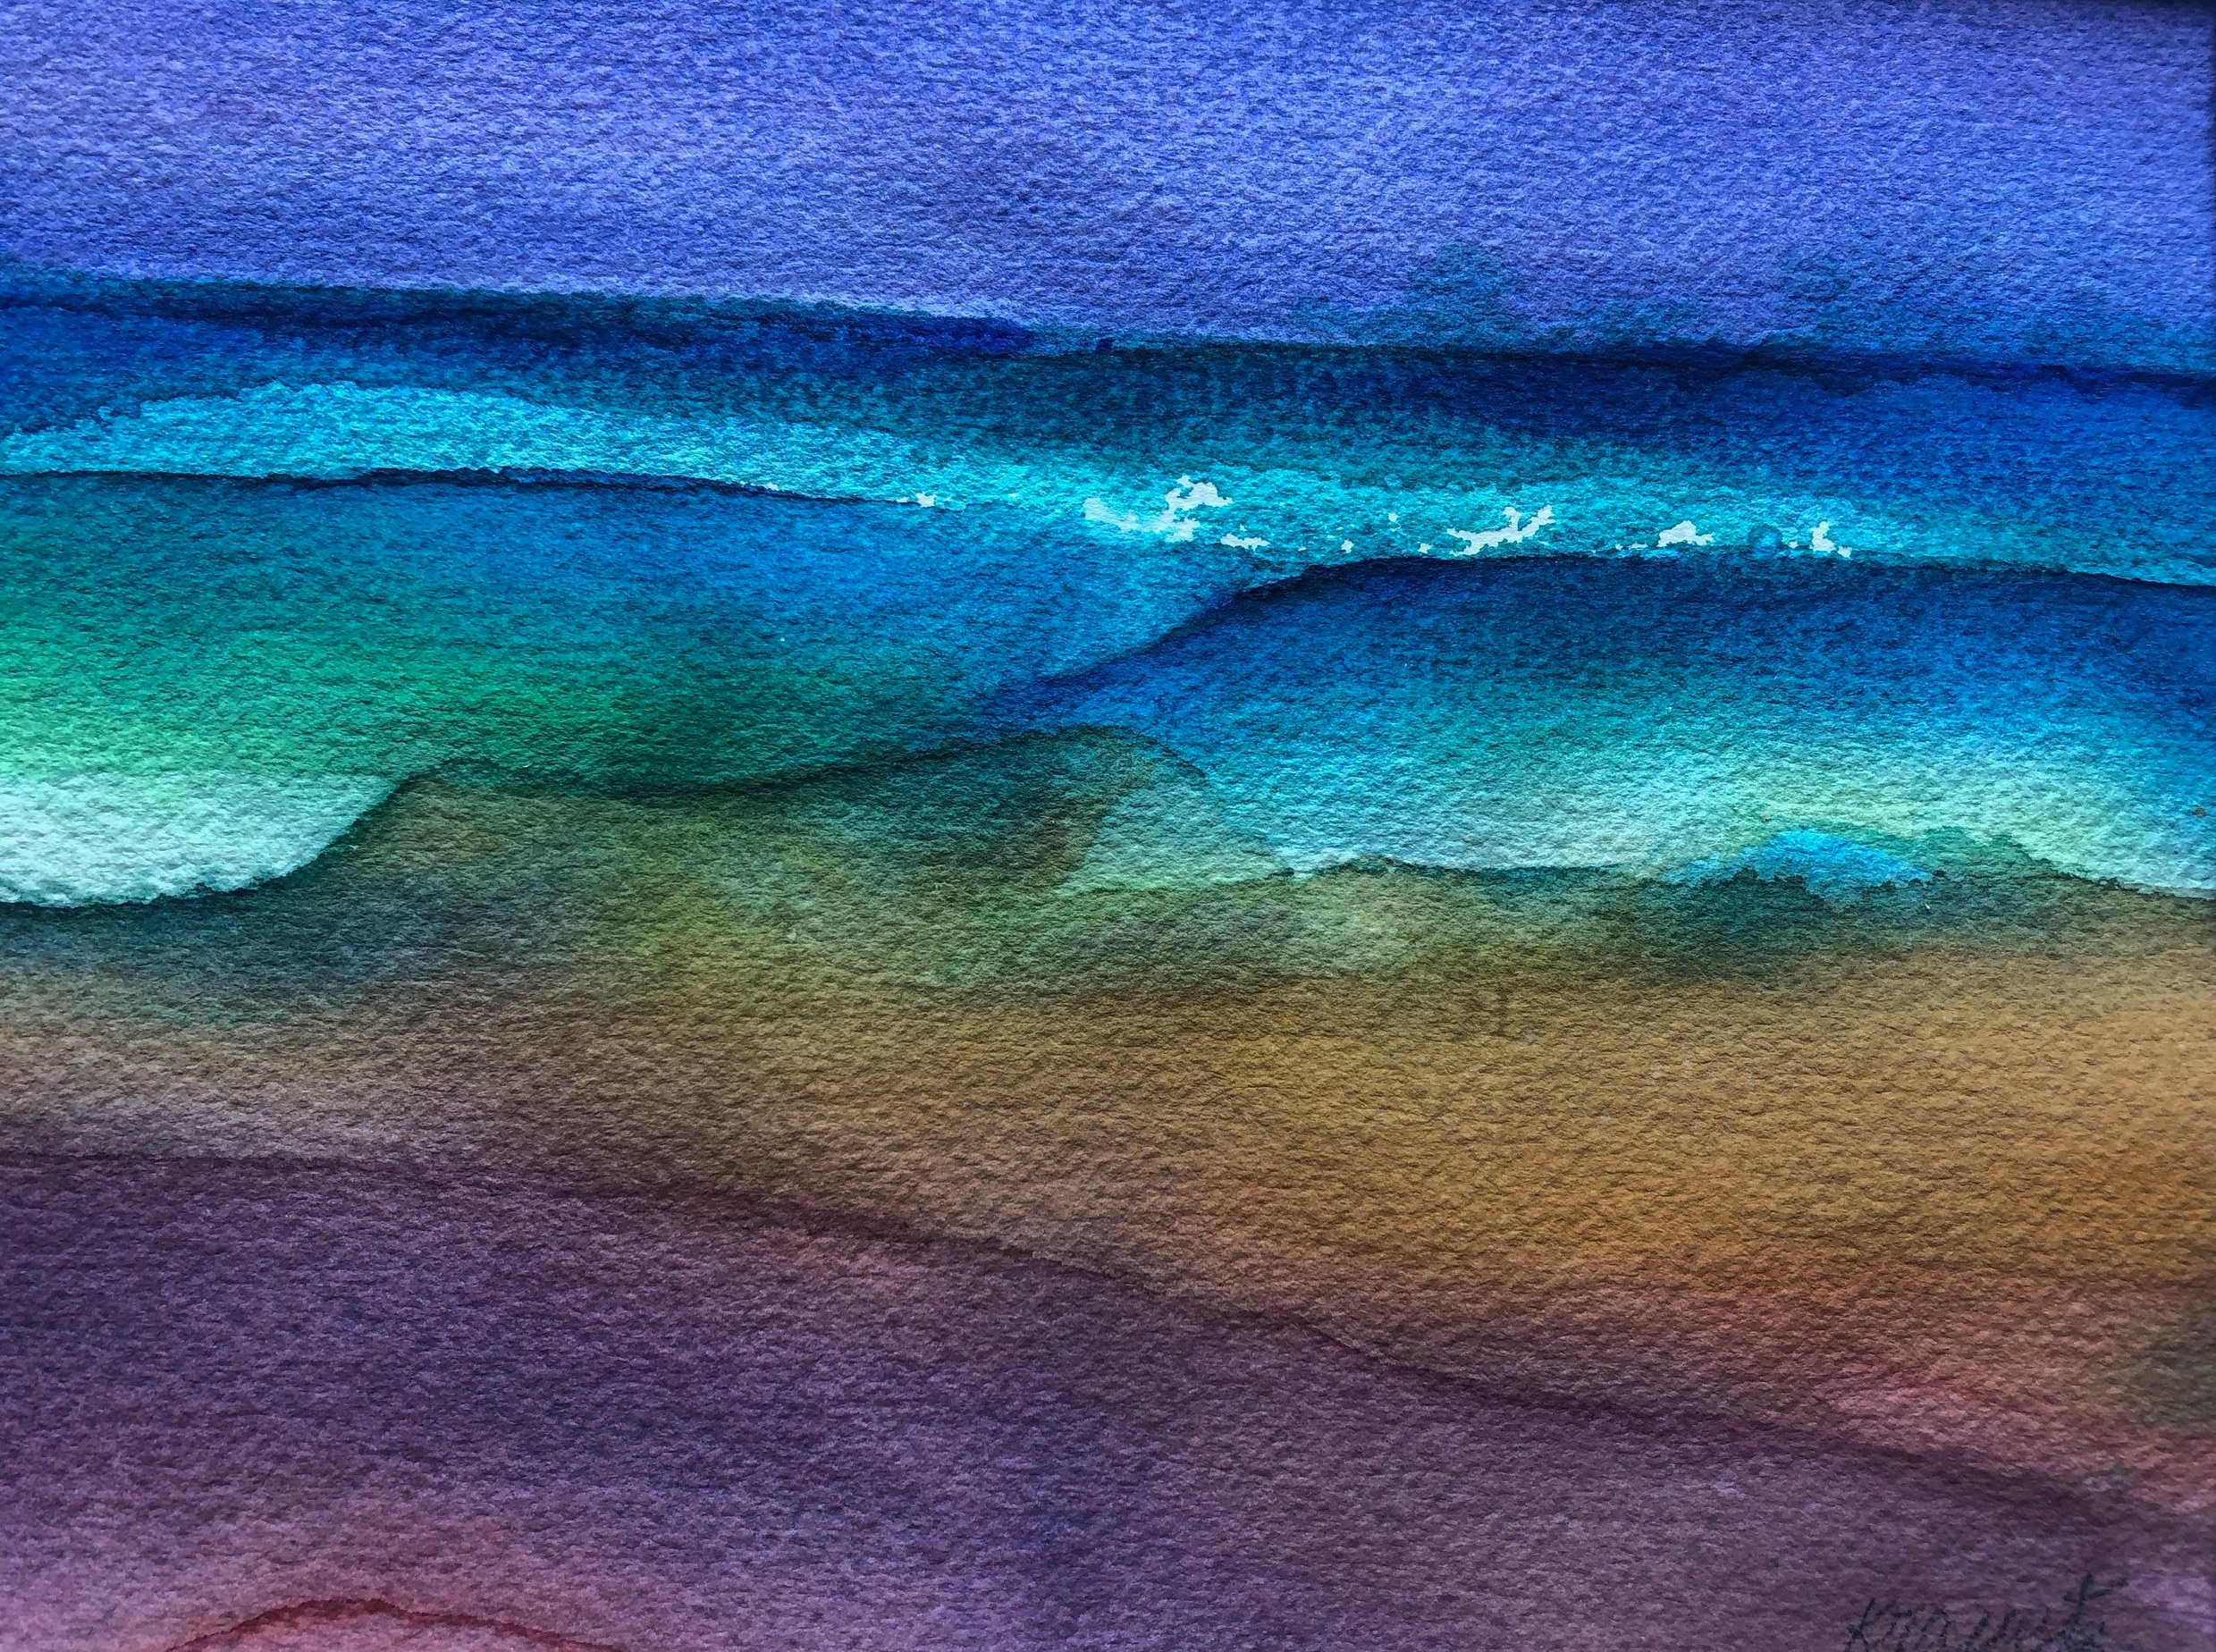 Full Spectrum Seascape, c. 1998, Watercolor, 14x16 inches with mat